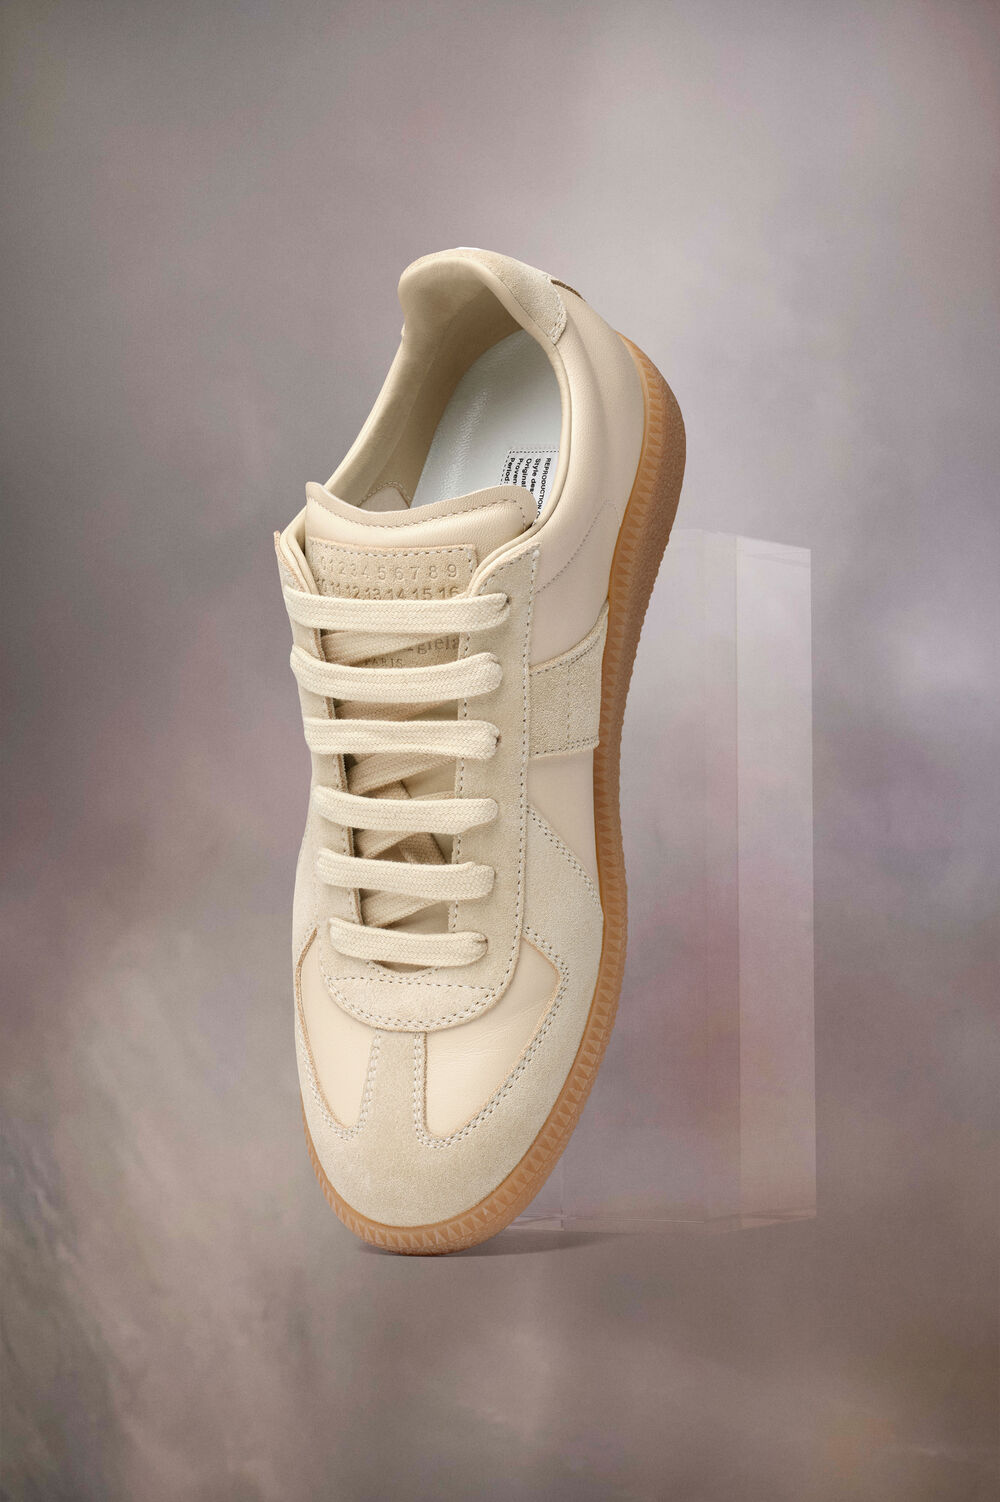 Maison Margiela’s characteristic shoes are emblems in their own right. Designed by Creative Director John Galliano, the seasonal shoe collections consistently evolve the classic codes of the house while pushing the boundaries of craftsmanship. With its iconic split-toe, the house’s trademark Tabi silhouette is interpreted across styles, along with new adaptations of the hallmark Replica sneakers. Proposals reimagine the tropes of shoe-making in leather or mixed materials: flats traverse trainers, ballerinas, sandals, loafers, derbies and brogues, while heels manifest in pumps, mules, Mary-Janes, and boots expressed with platforms and block or chunky heels.